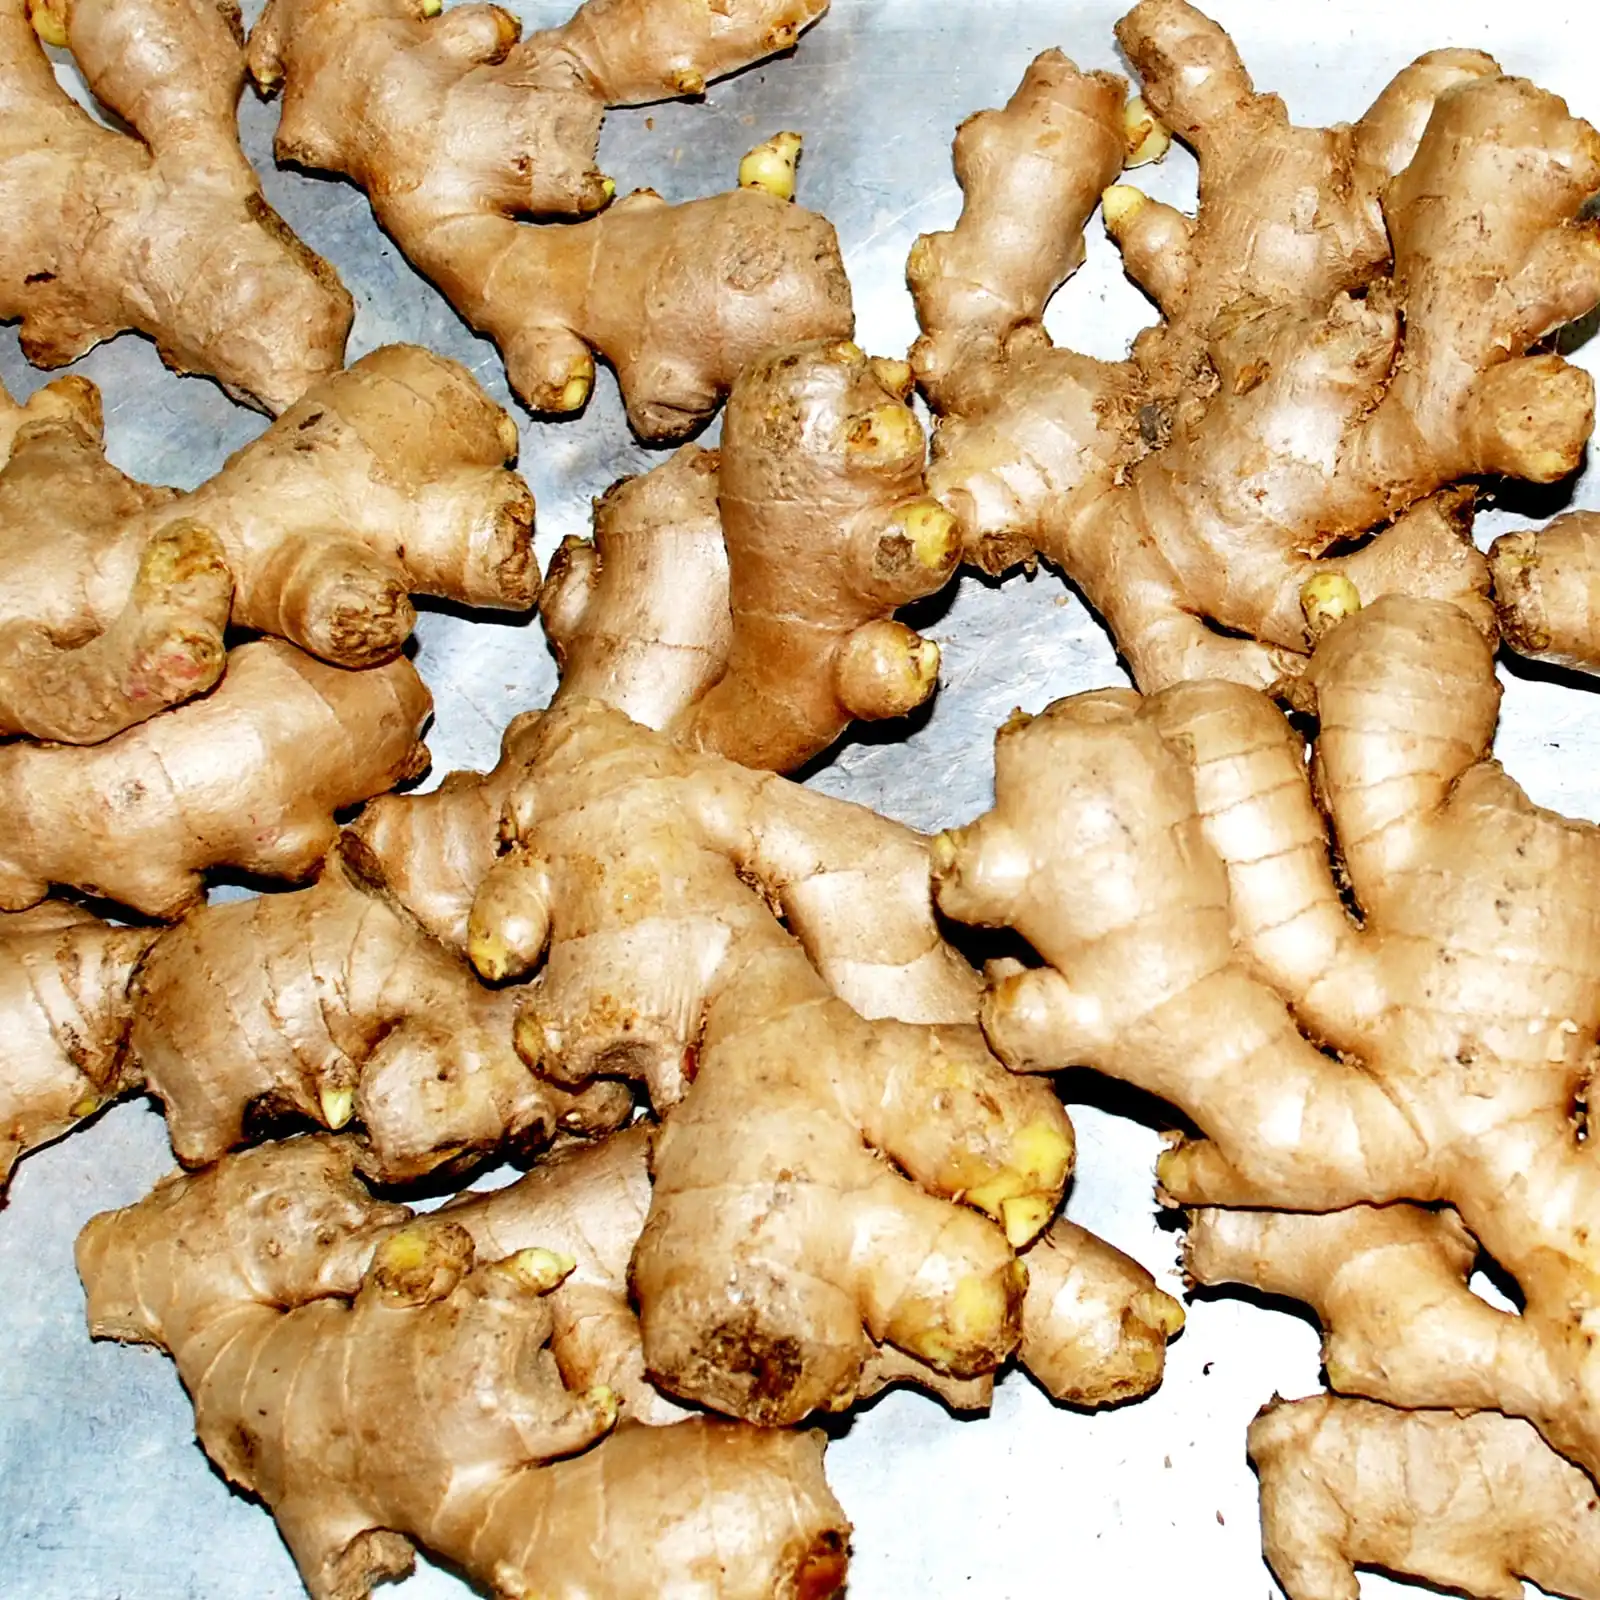 Wholesale Price Fresh and Dried Ginger for sale best market price